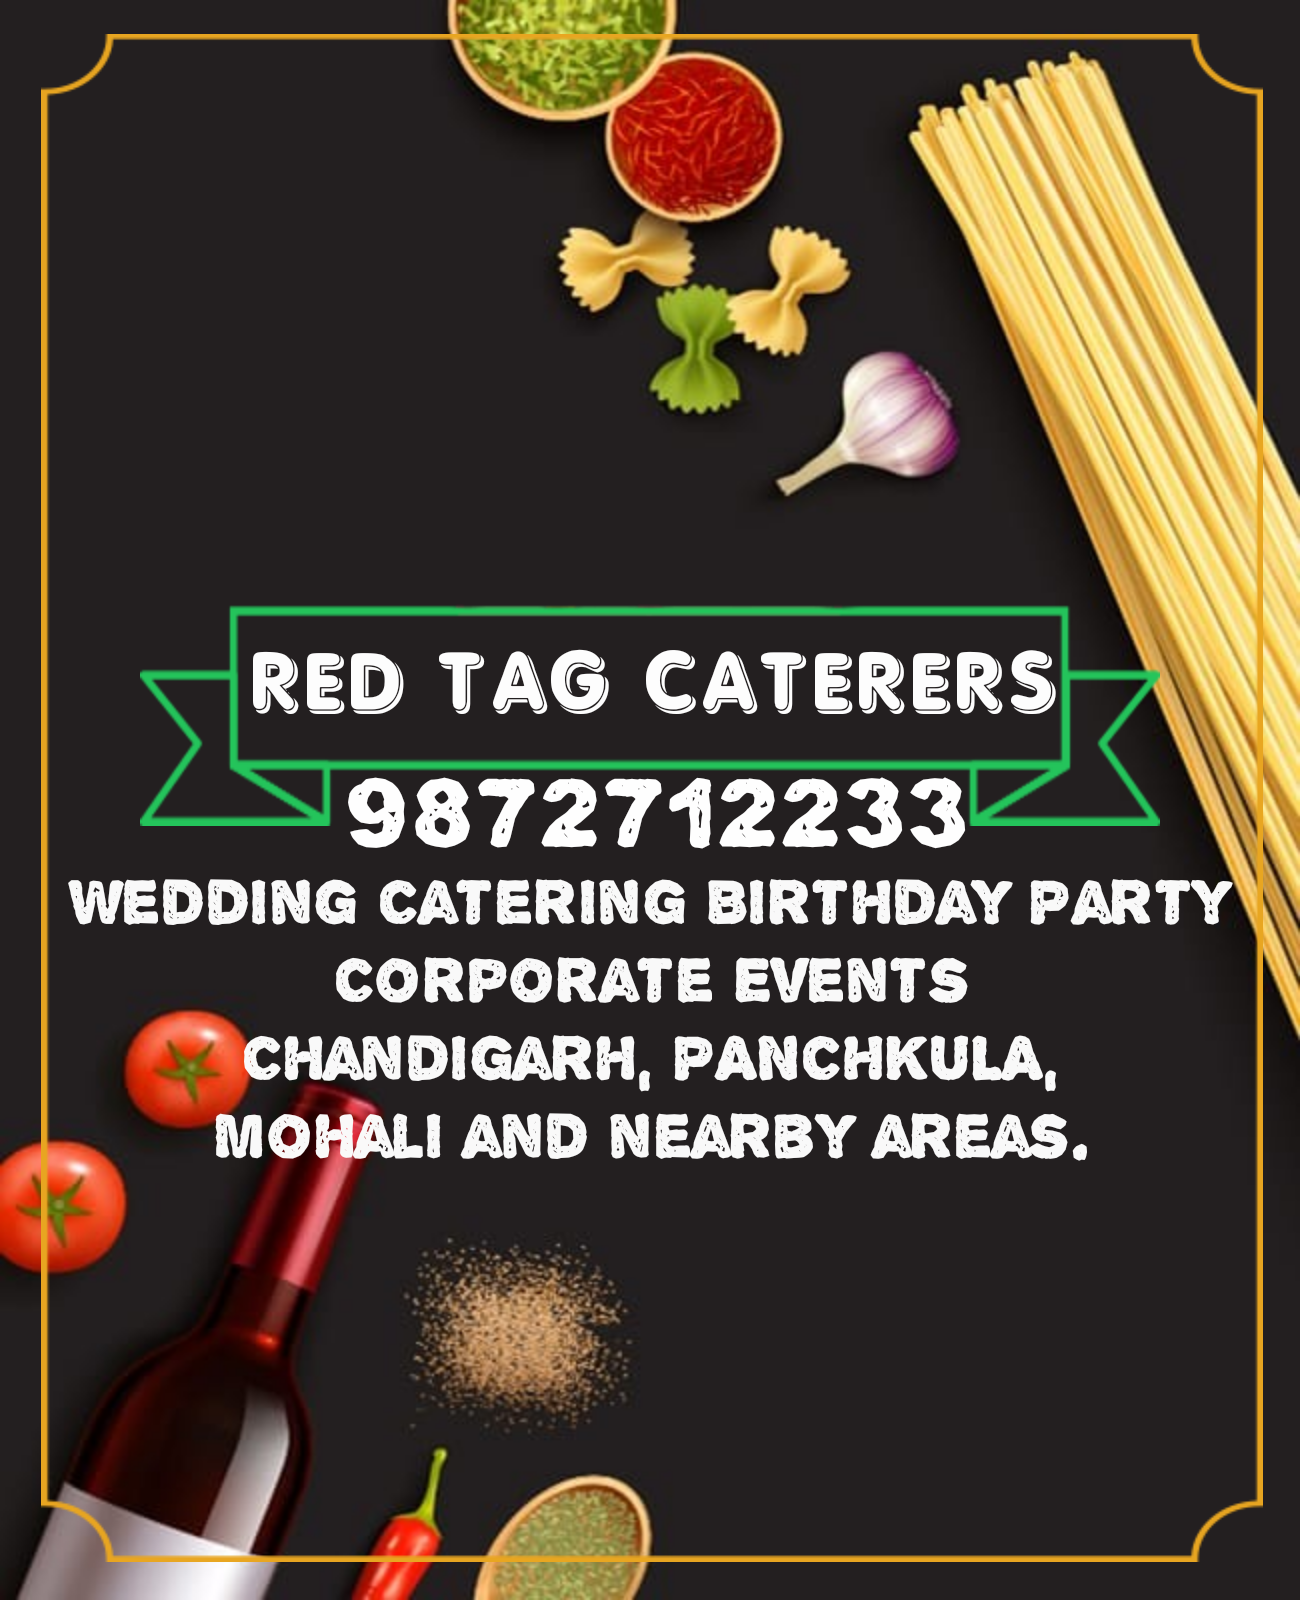 Uncompromised Caterers in Mohali Punjab | Red Tag Caterers | Best events planner in Mohali - GL76026